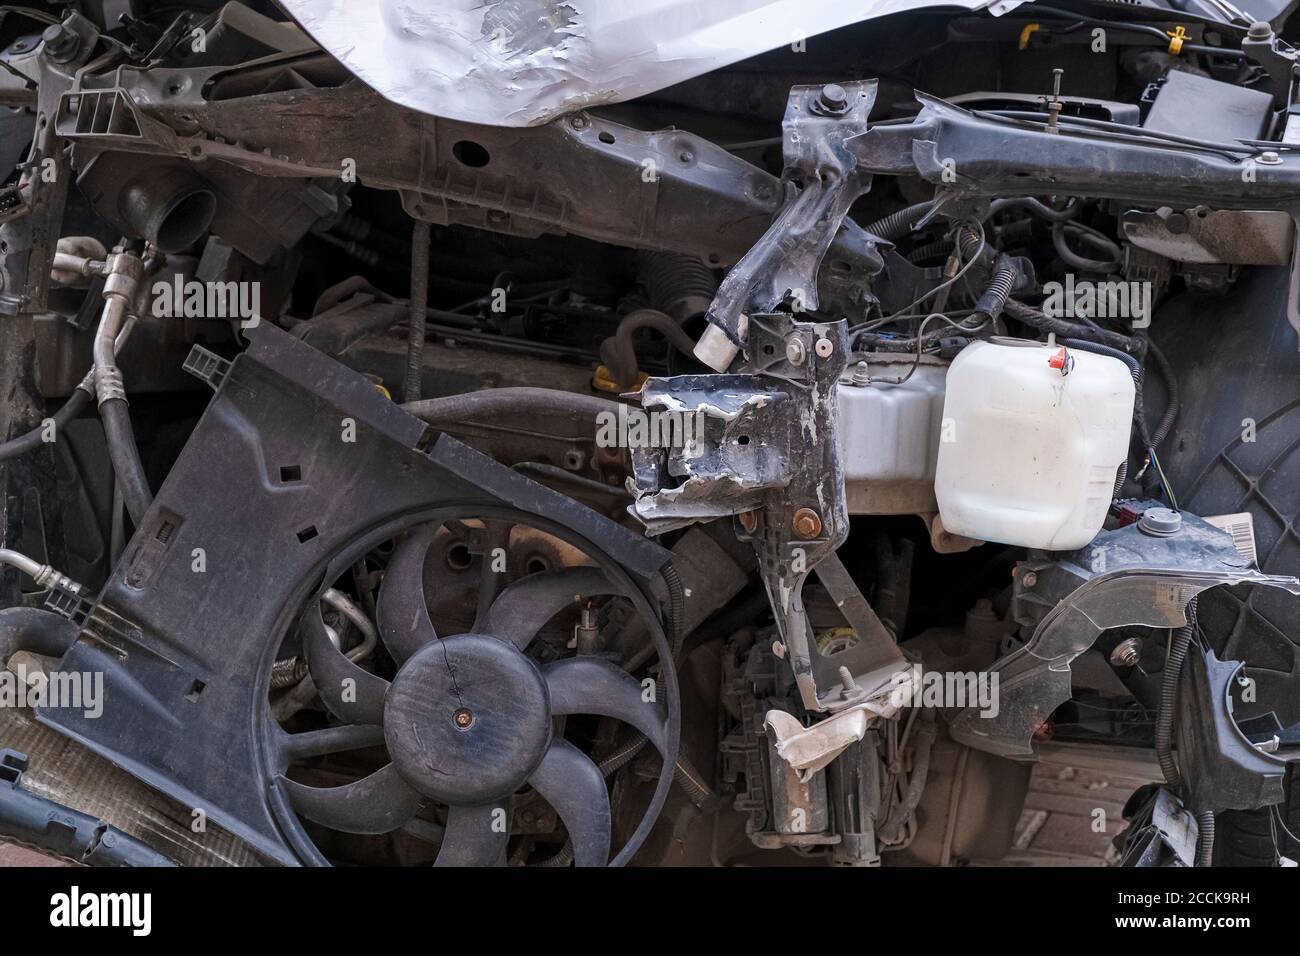 Car crush. Close-up front view of a wrecked car. Car after head-on collision. Bent hood and broken parts Stock Photo